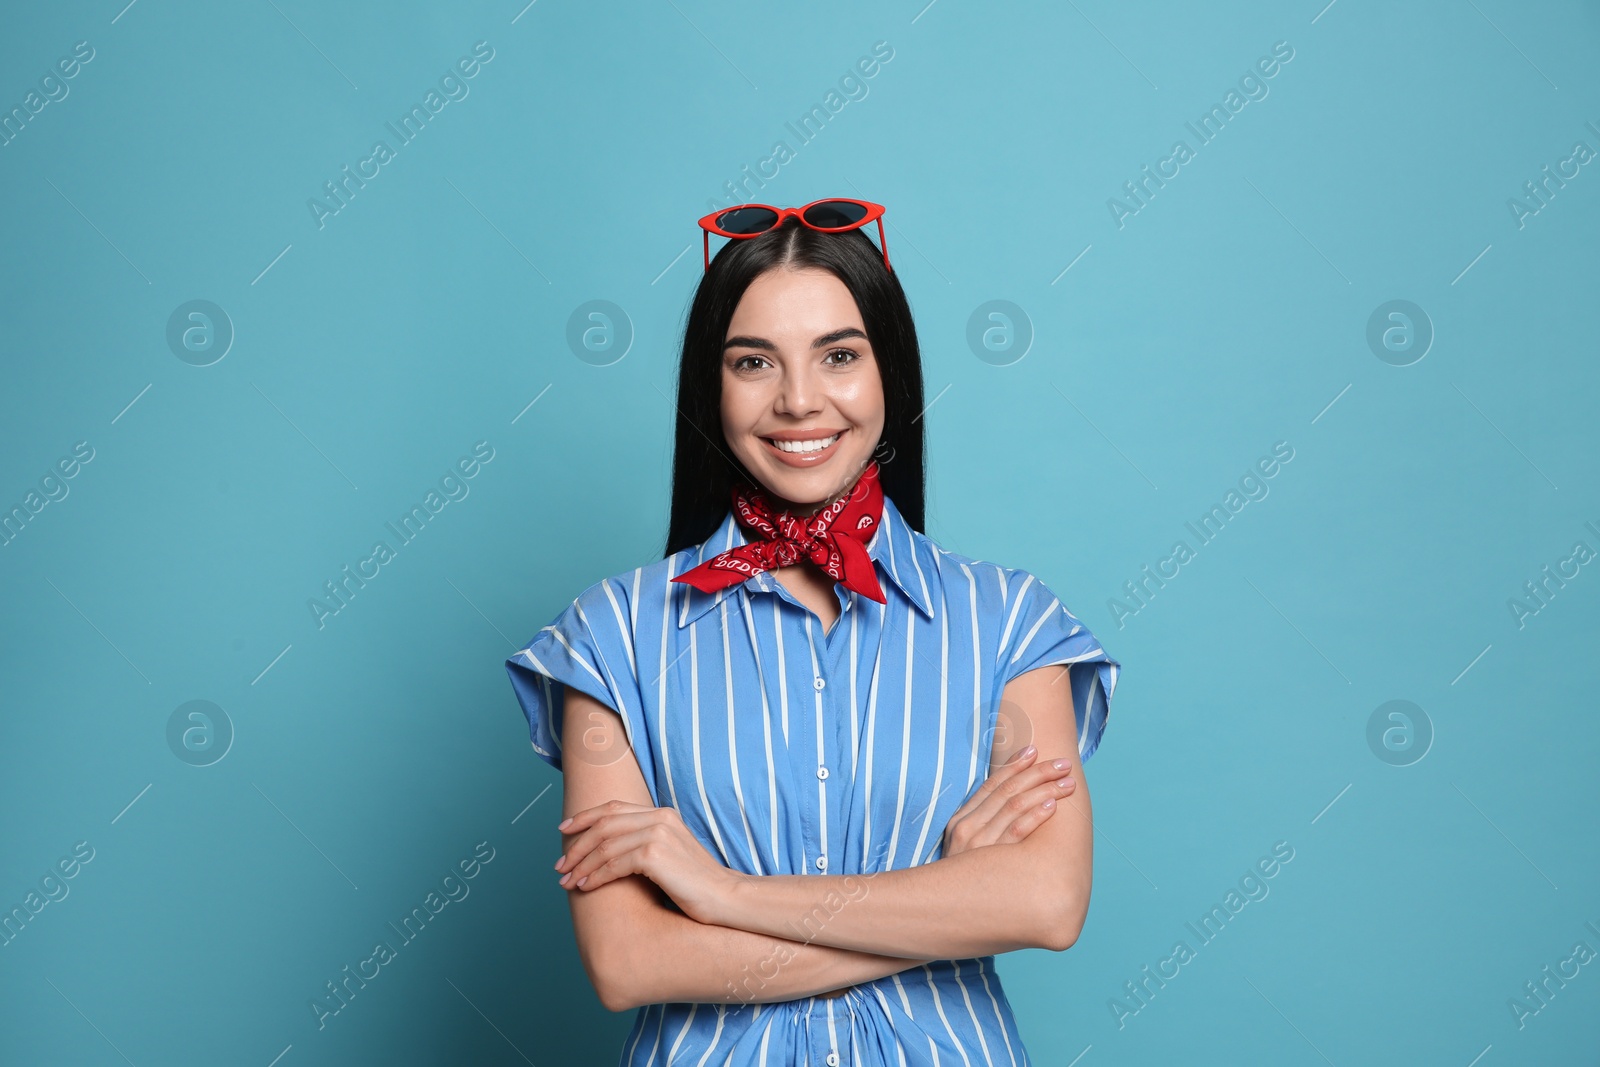 Photo of Fashionable young woman in stylish outfit with bandana on light blue background